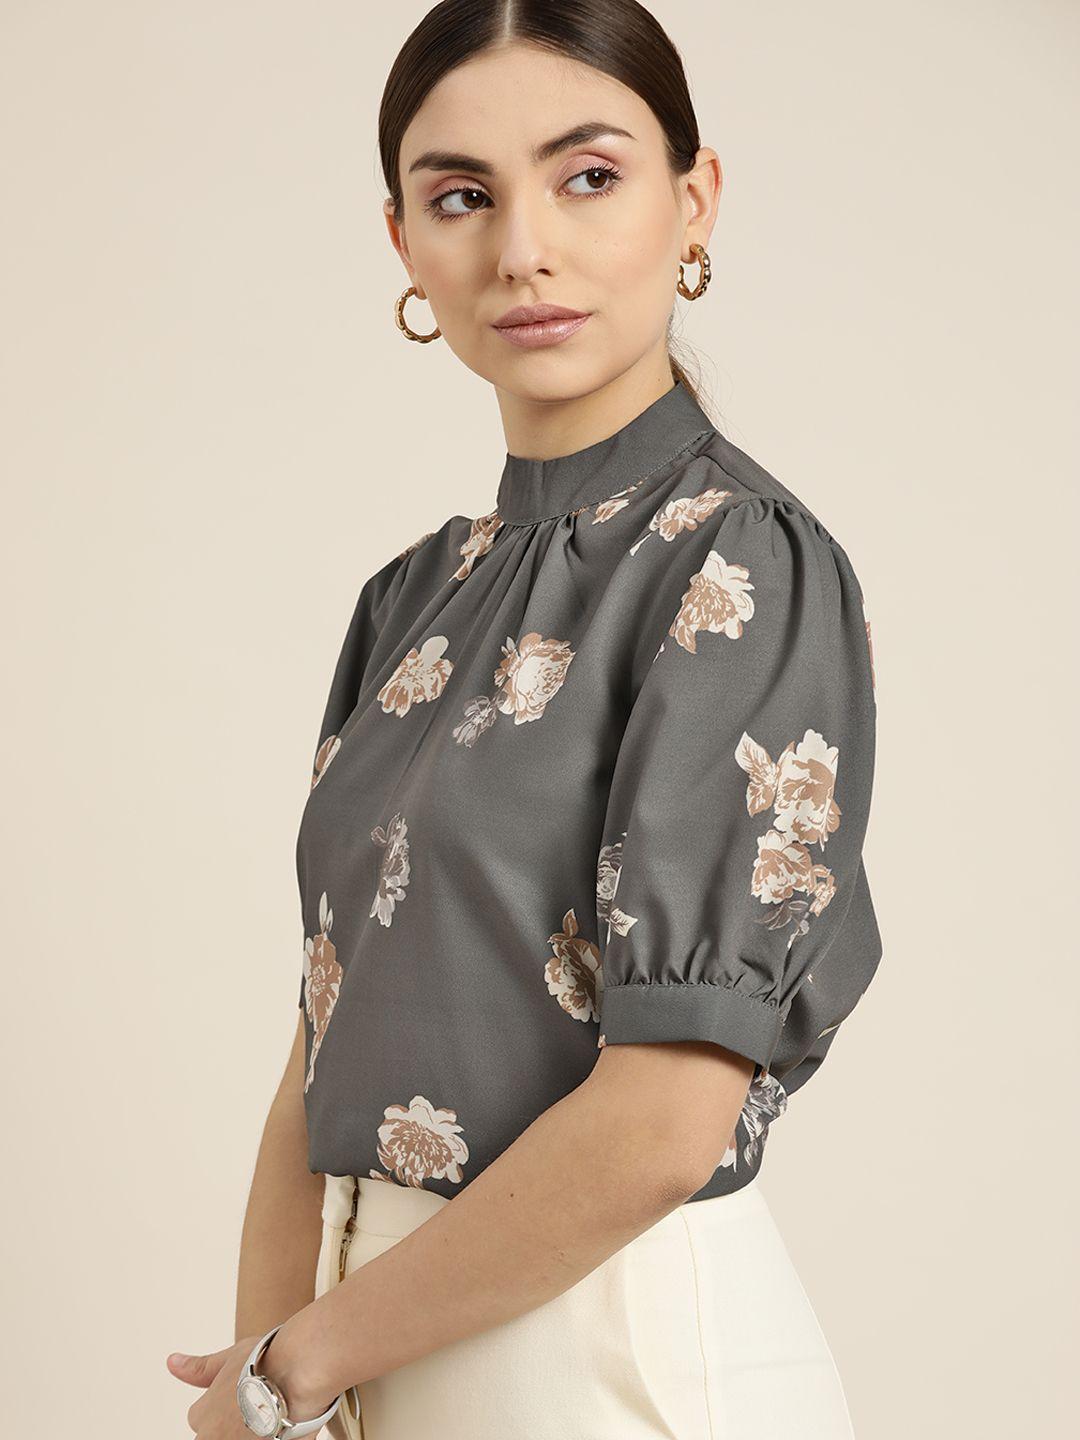 her by invictus charcoal grey & beige floral print top